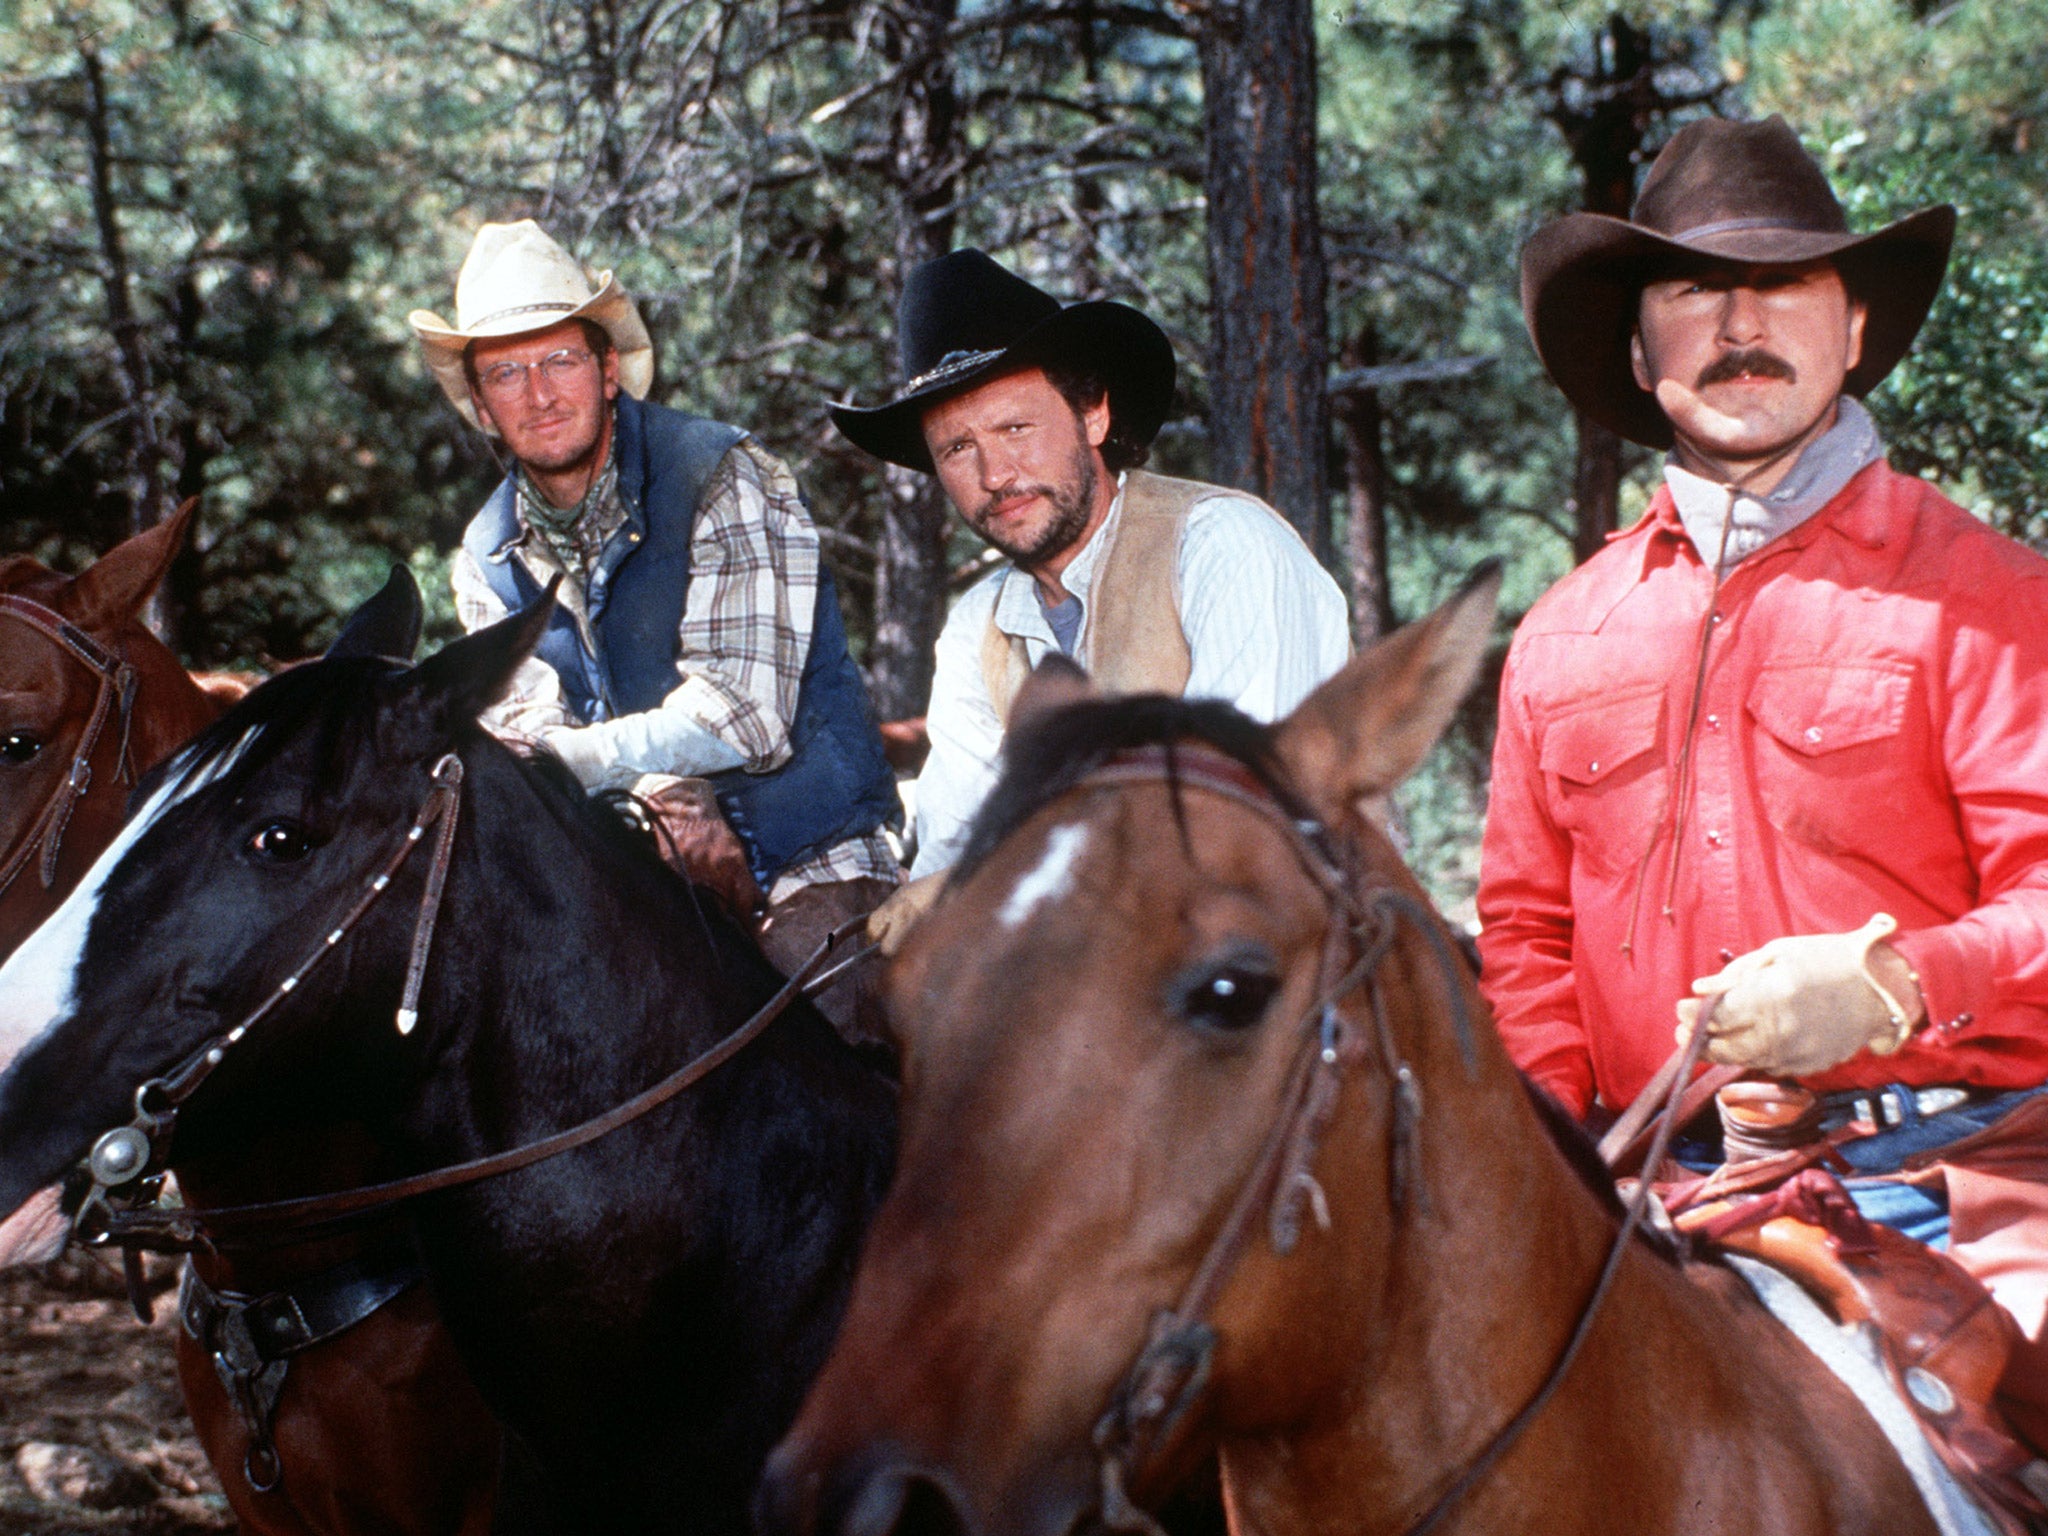 Going back to to nature can boost your brain power (from left) Daniel Stern, Billy Crystal and Bruno Kirby escape their stifling suburban lives in ‘City Slickers’